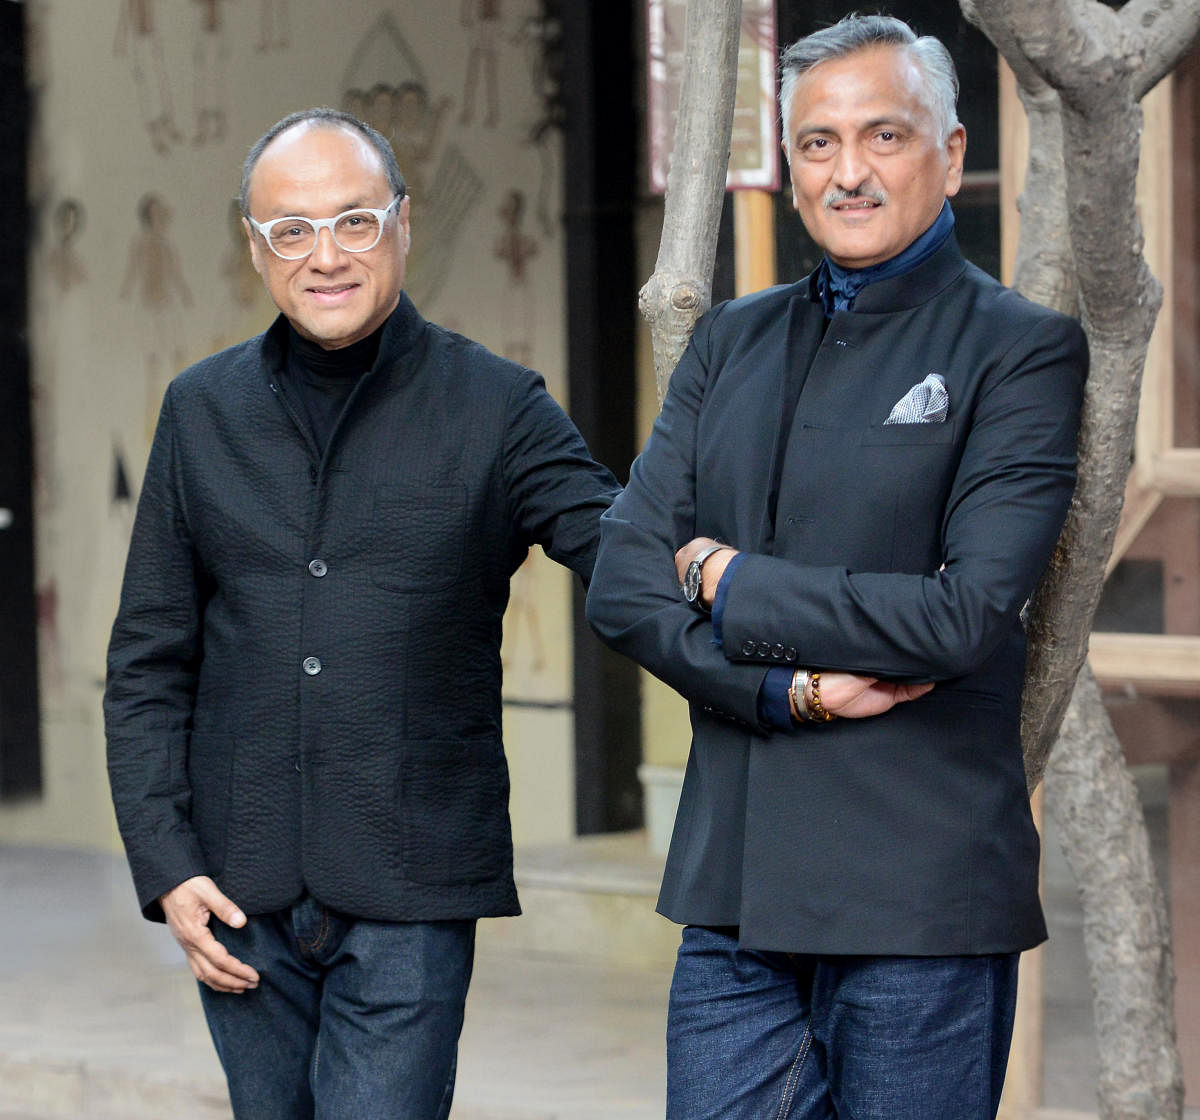 Designers David Abraham and Rakesh Thakore feel the pandemic has changed the rules of designing and brought substantial changes into the fashion industry.